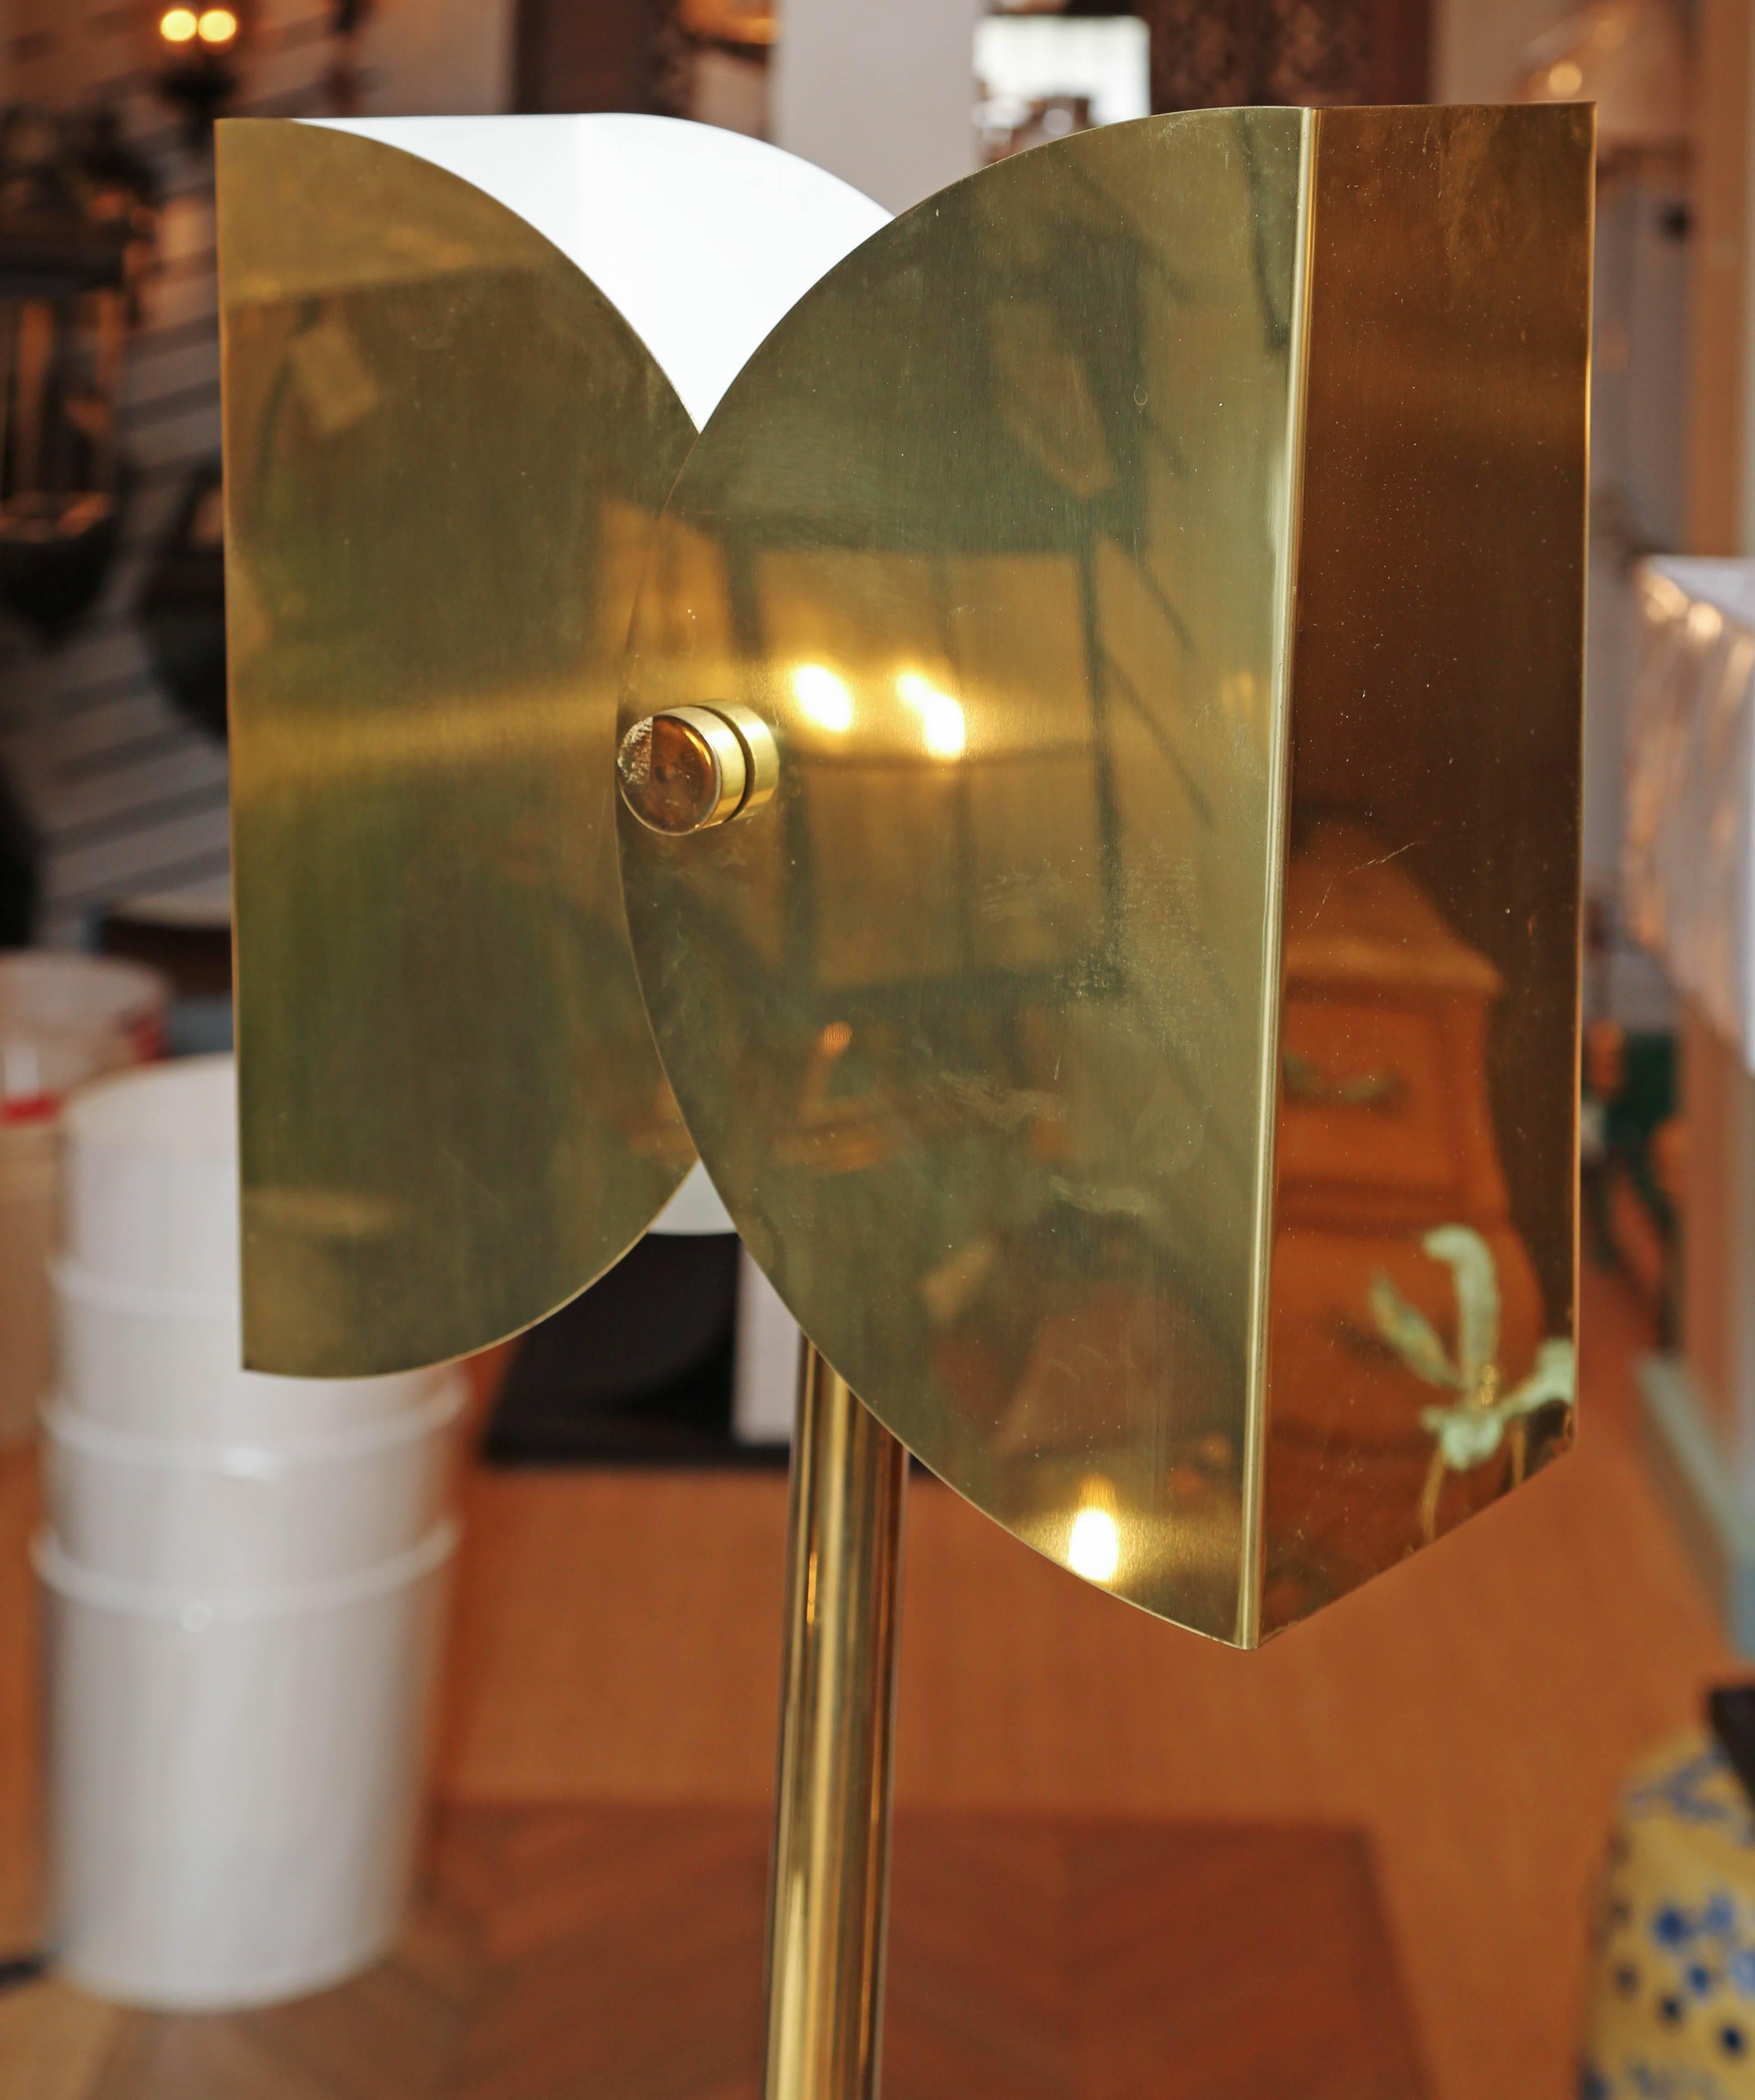 Superb Vintage Floor Lamp in Brass with a Vectored Hood by Koch & Lowy 1